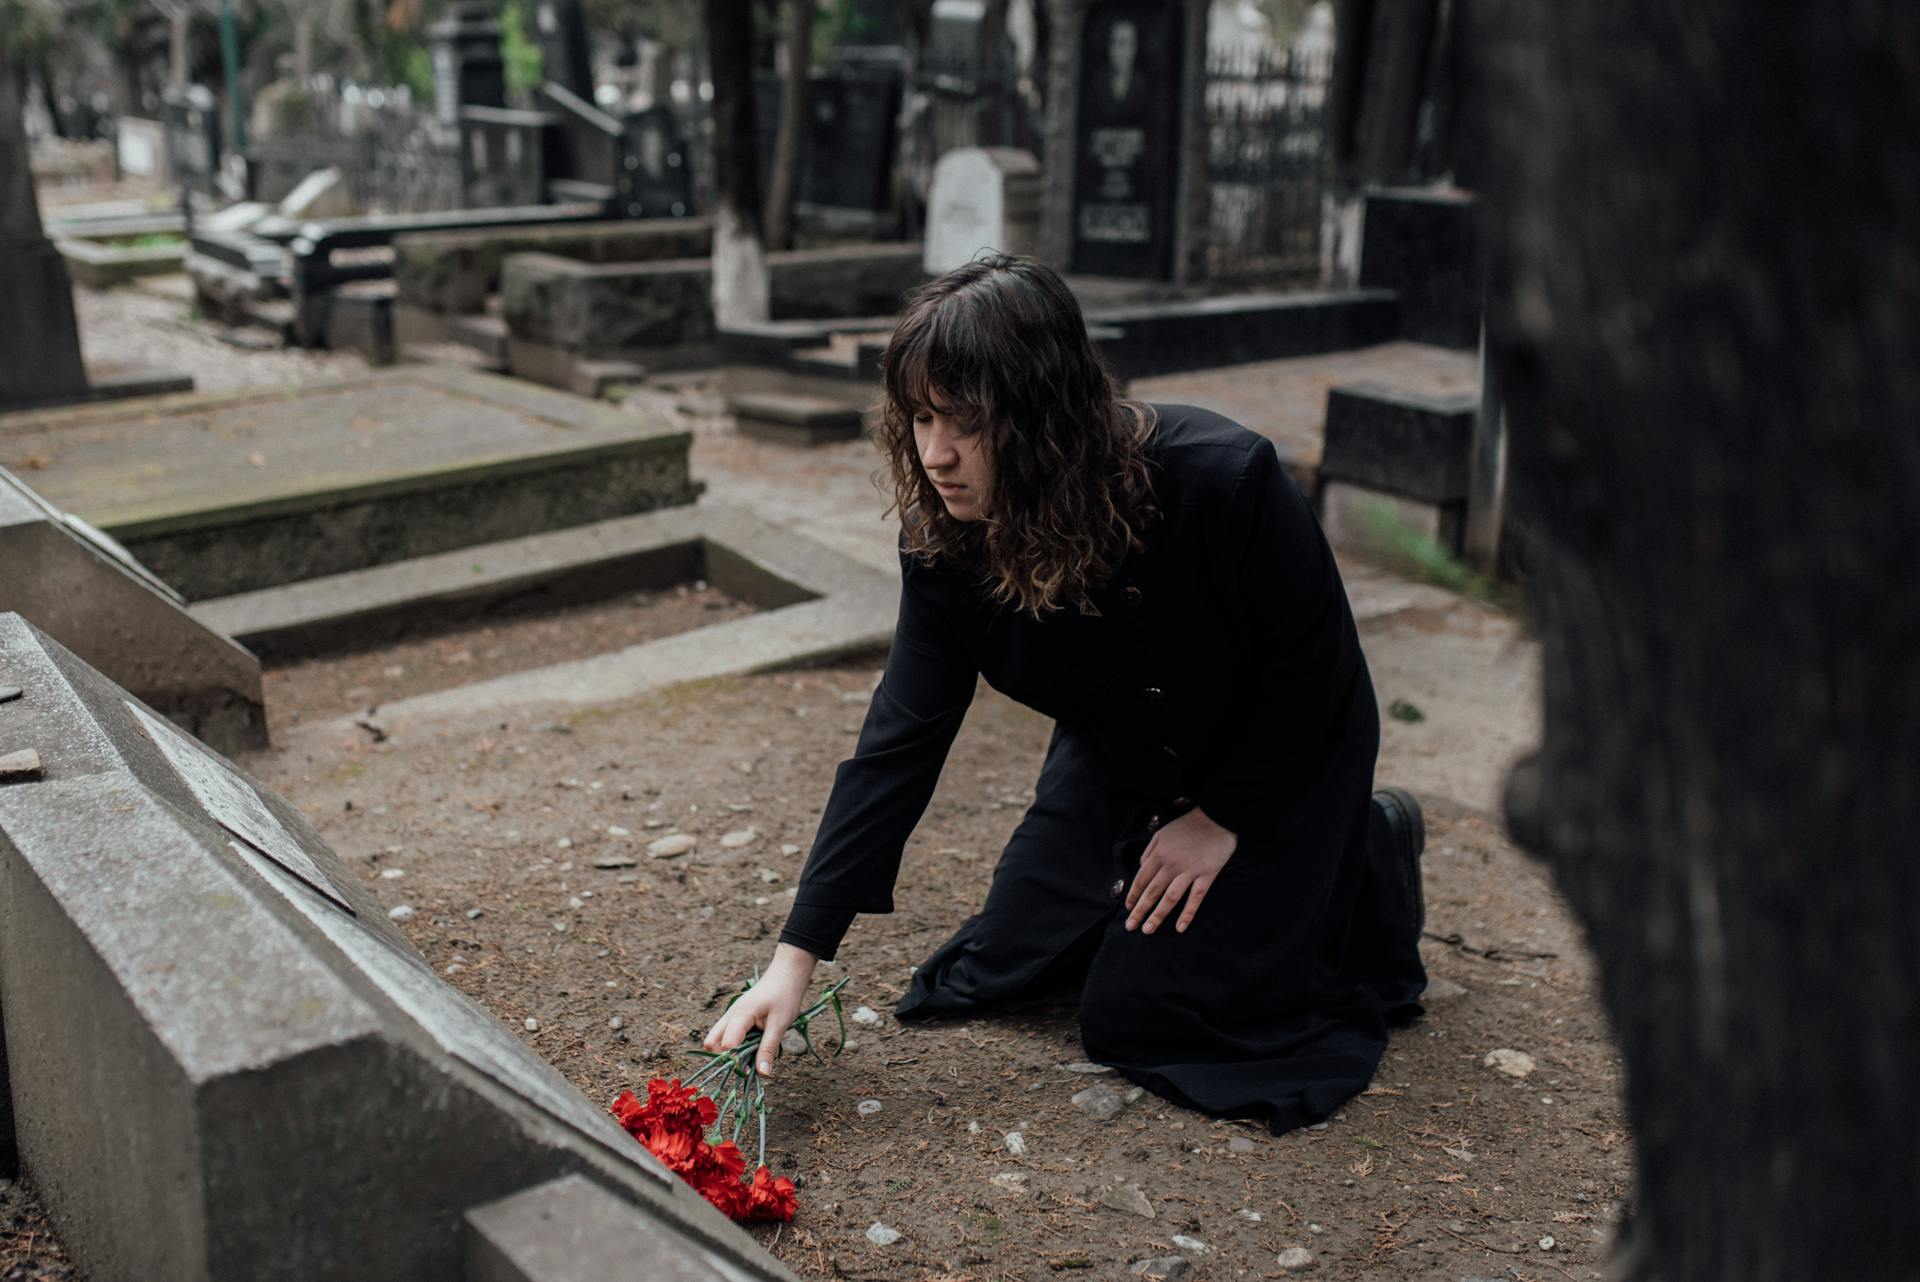 A person at a cemetery | Source: Pexels